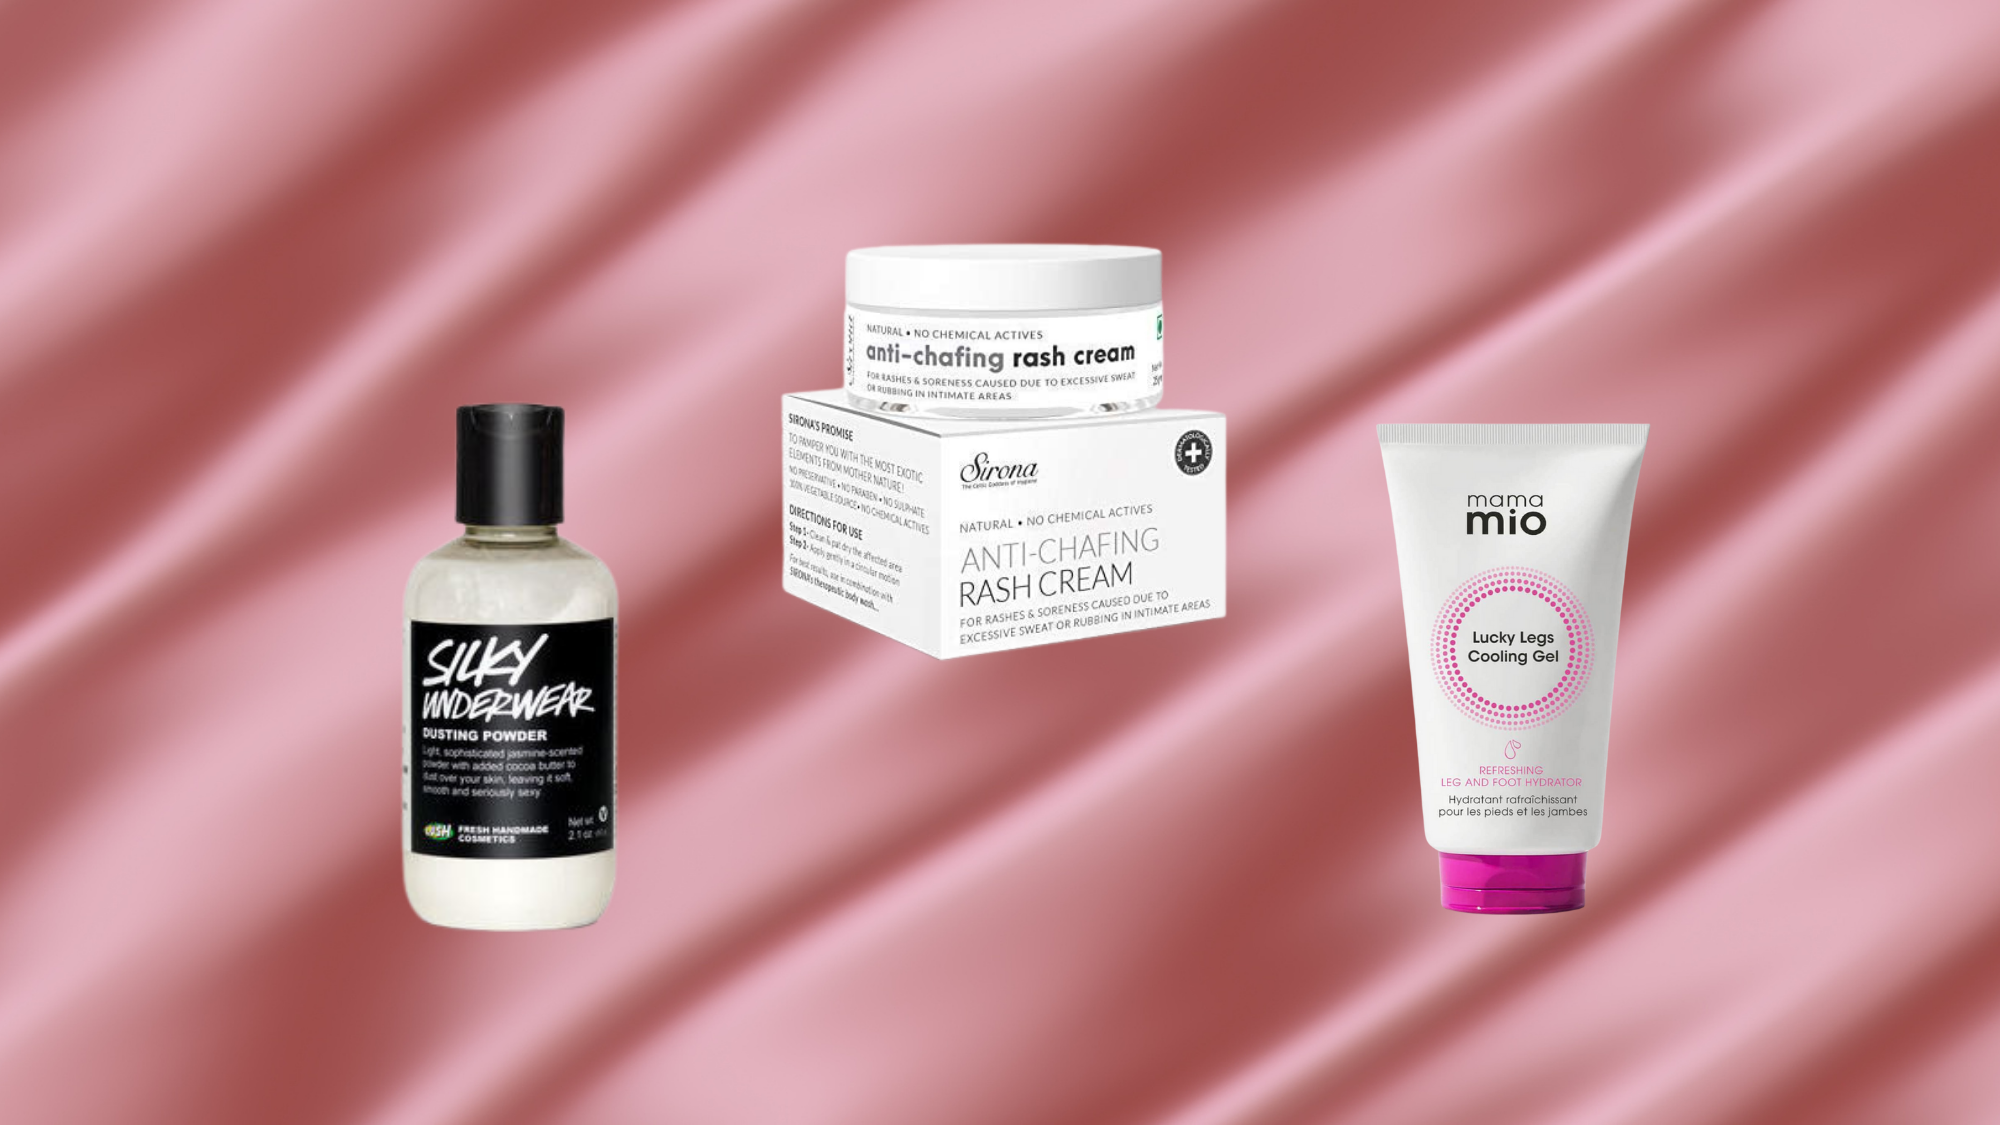 Chafing cream: 13 products to help with summer thigh chafing